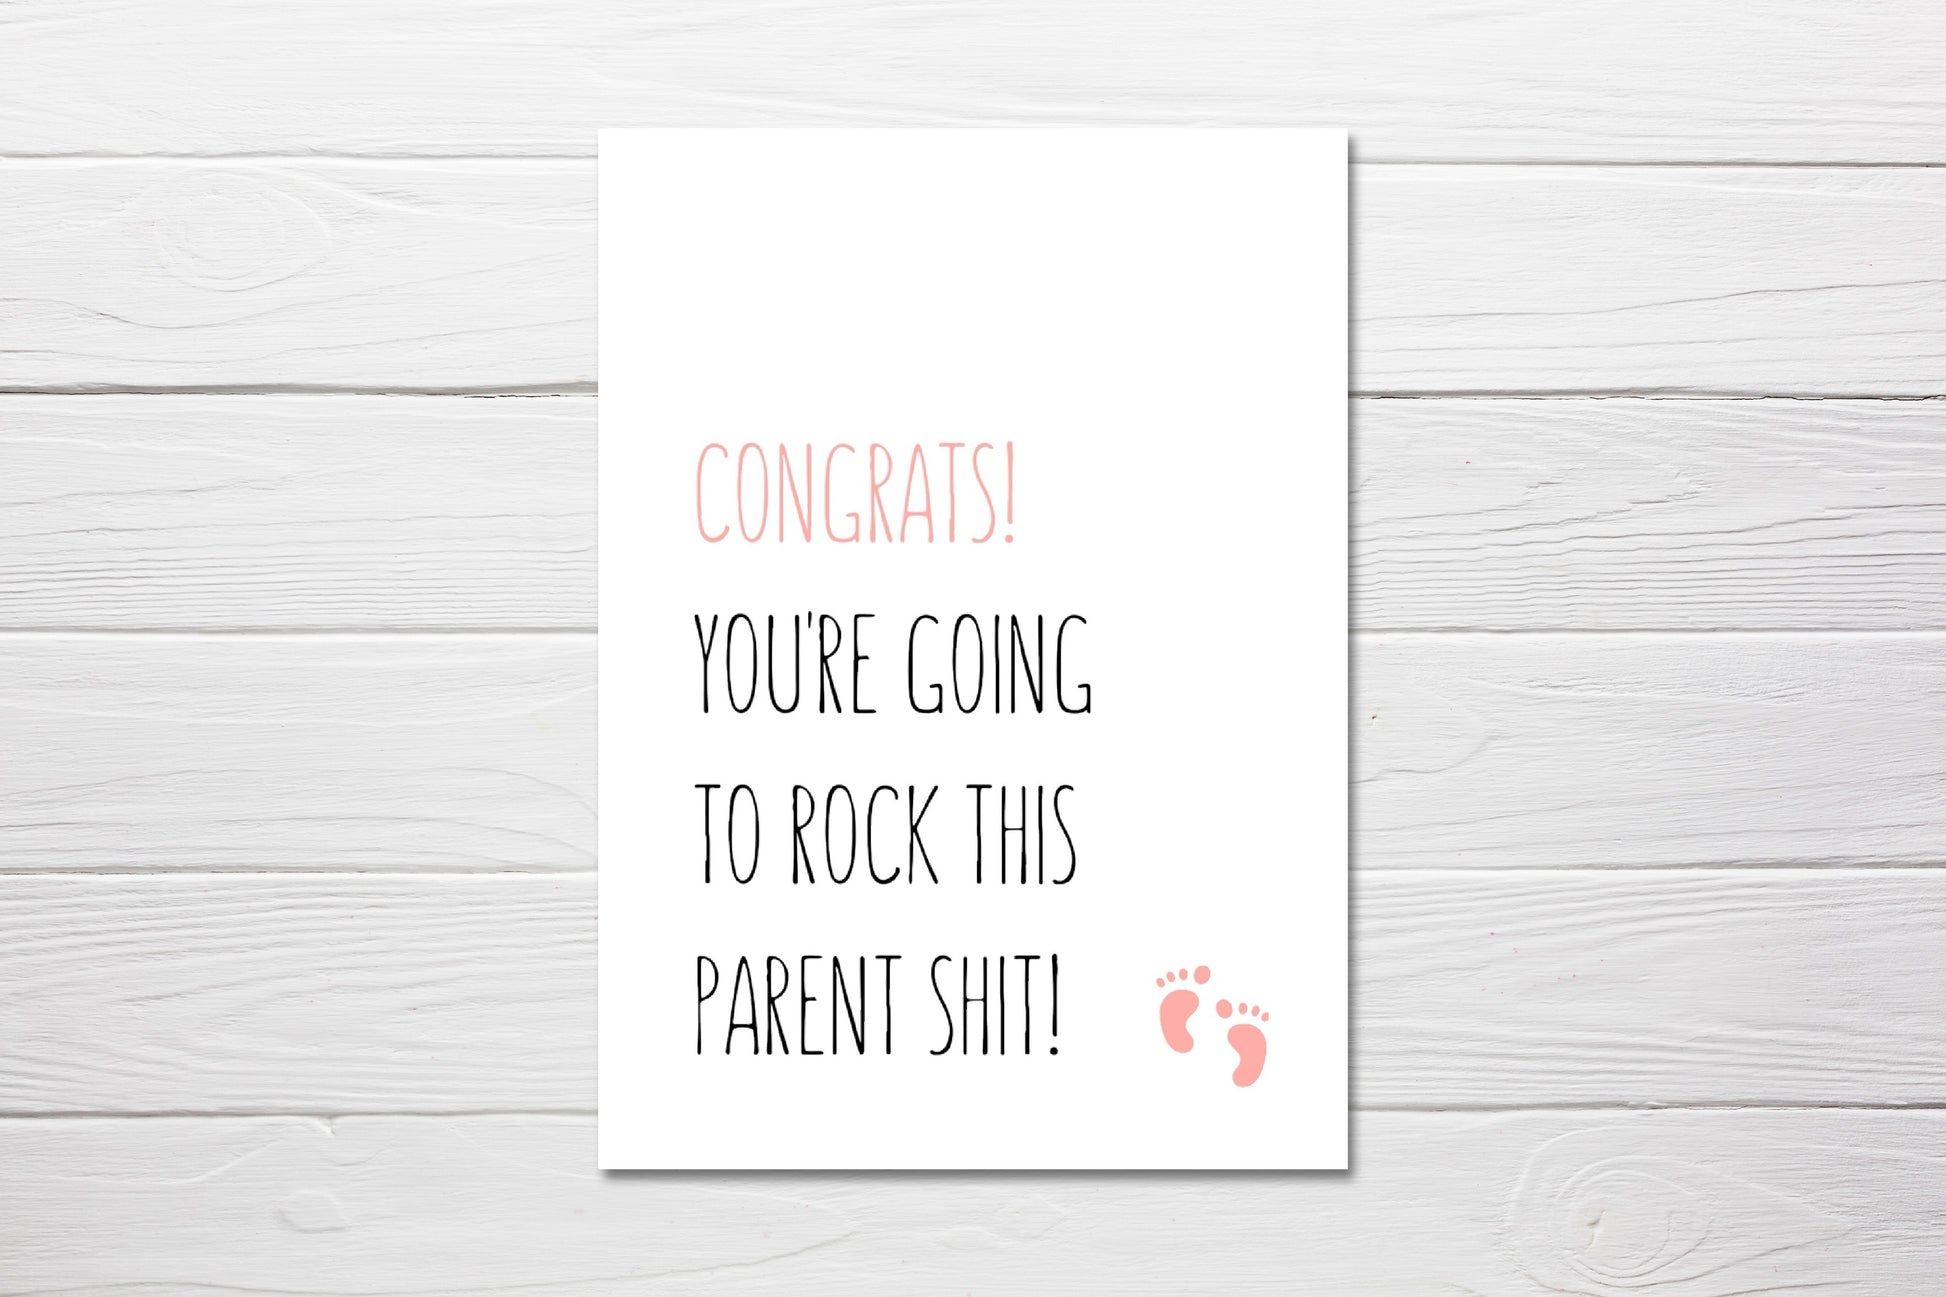 Baby Shower Card | Congrats, You're Going To Rock This Parent Shit | New Baby Card - Dinky Designs